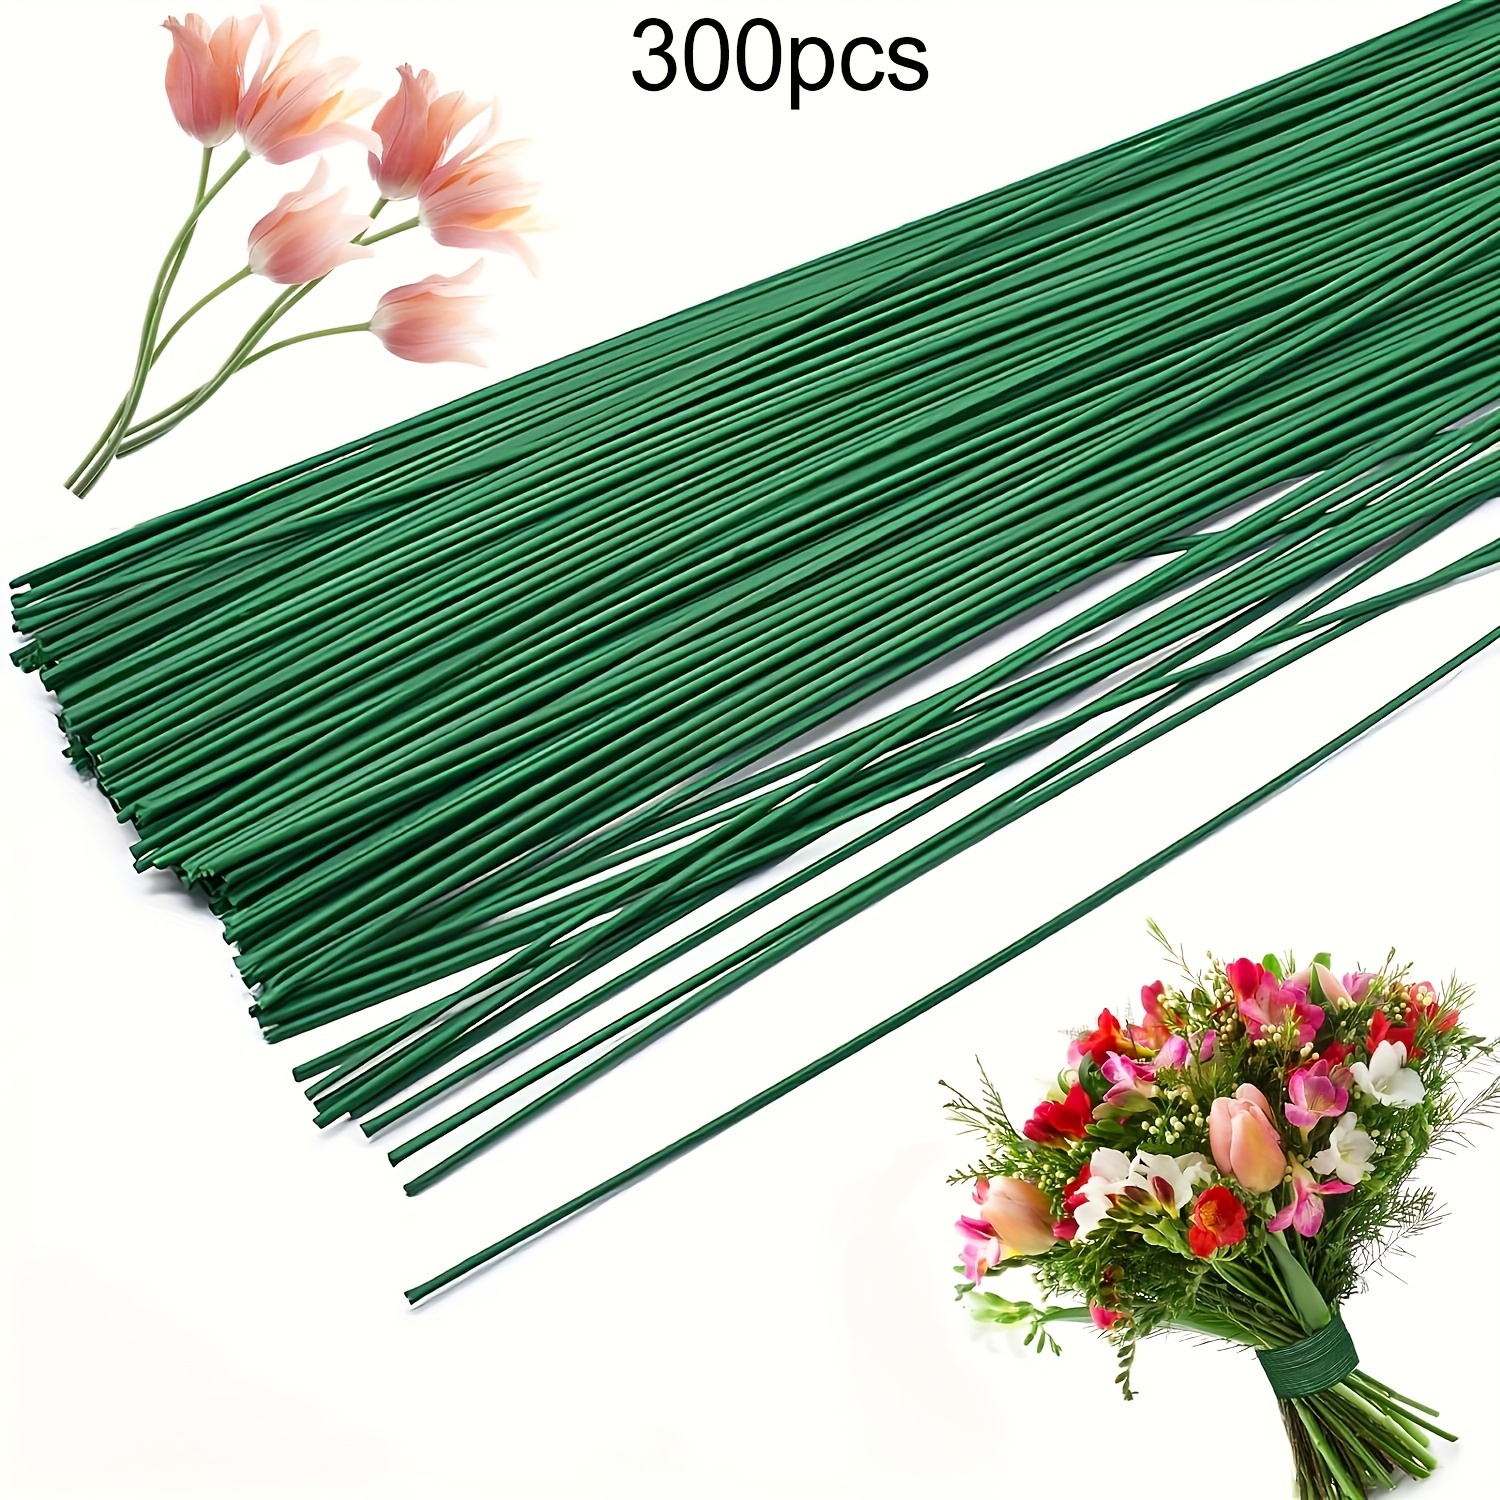 

300 Pcs 40cm Green Floral Wire, Iron Stems For Flower Arrangements And Craft Projects